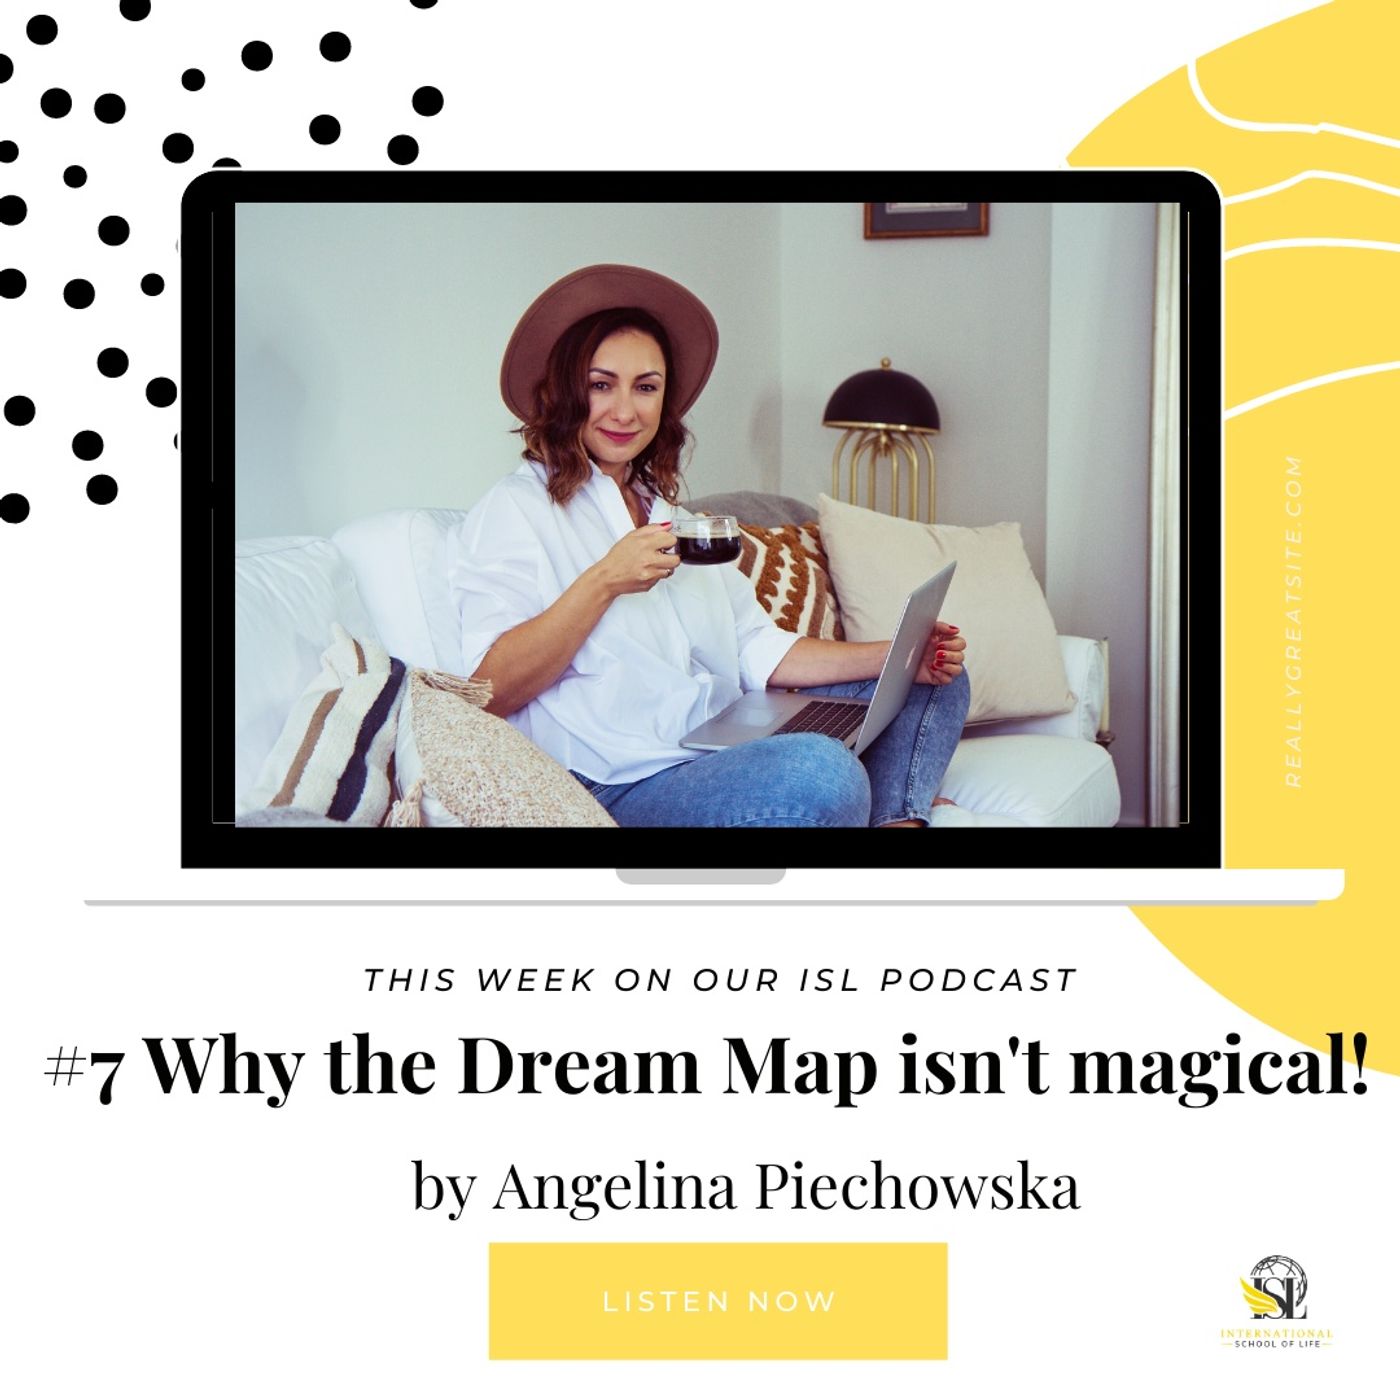 #7 - Why Dream Map is not magical! by Angelina